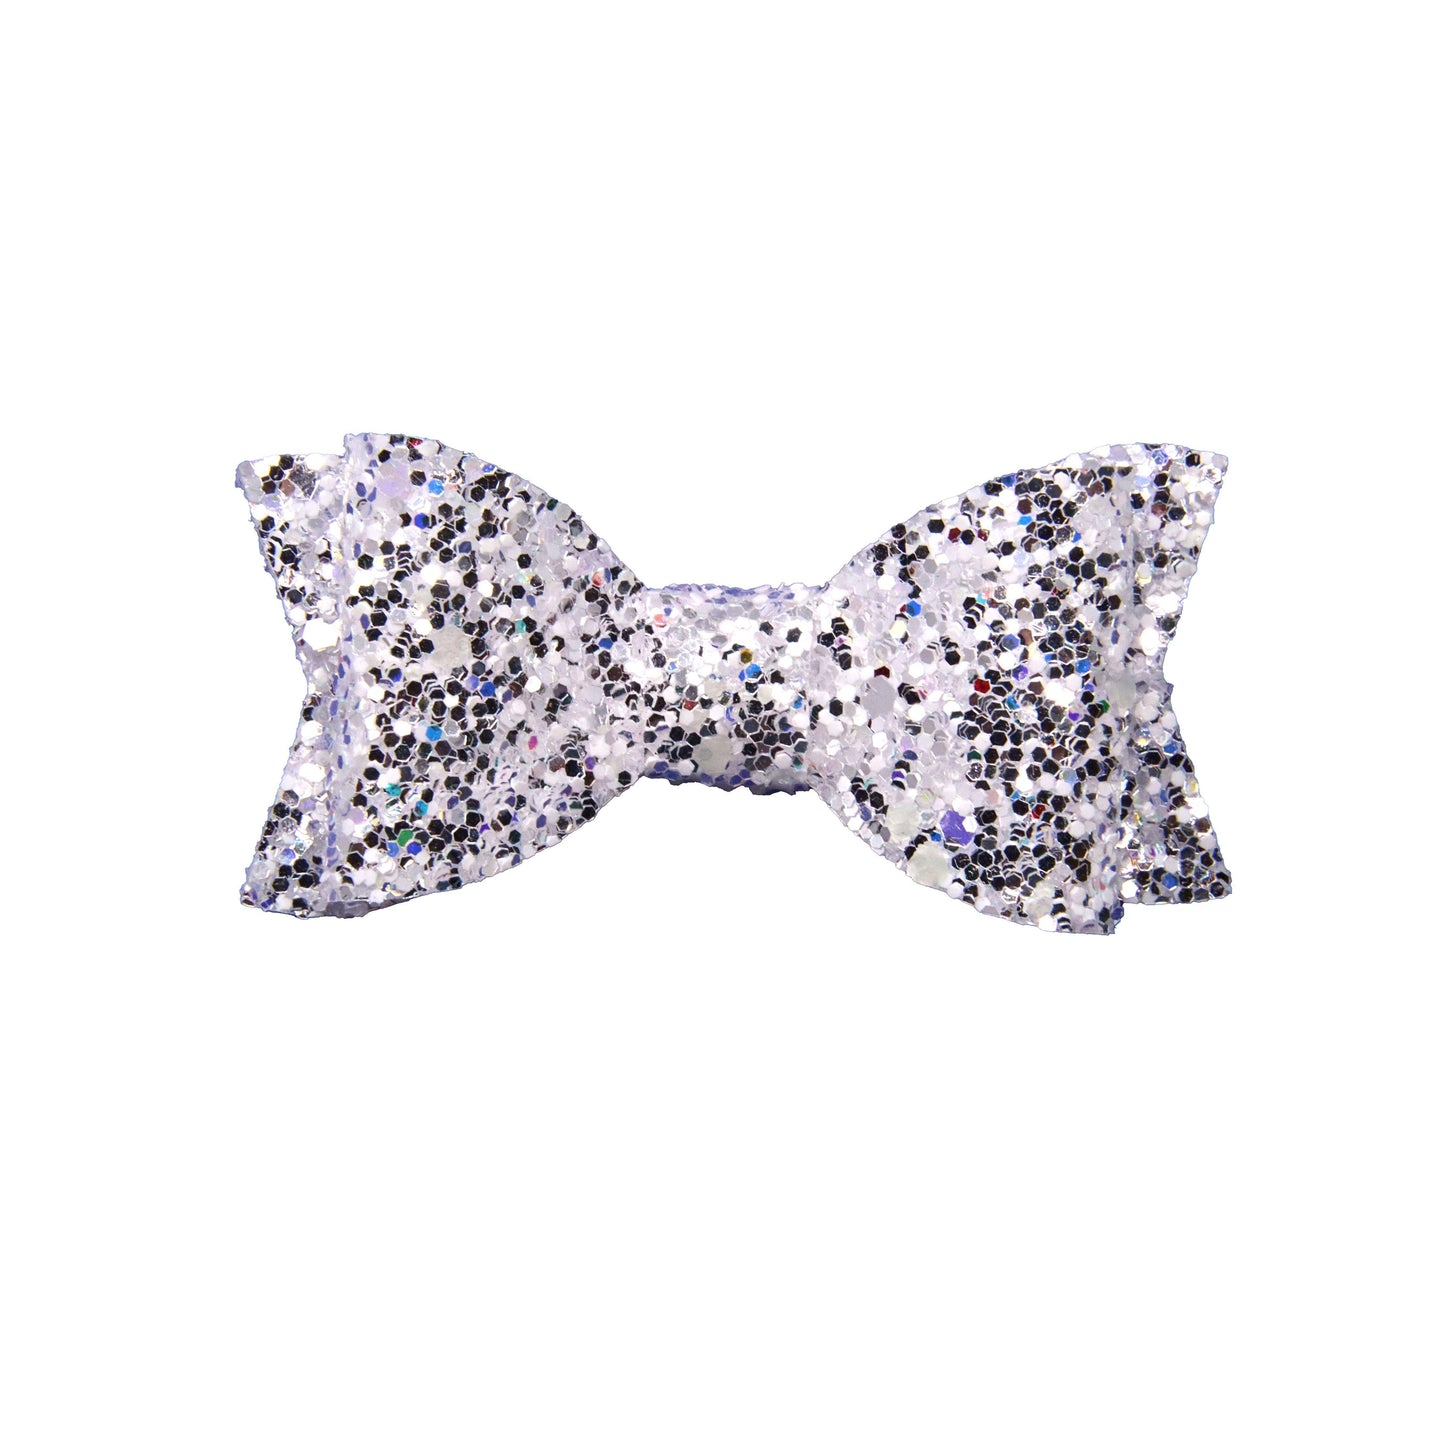 2.5 inch White & Silver Glitter Claire Bow (pair)